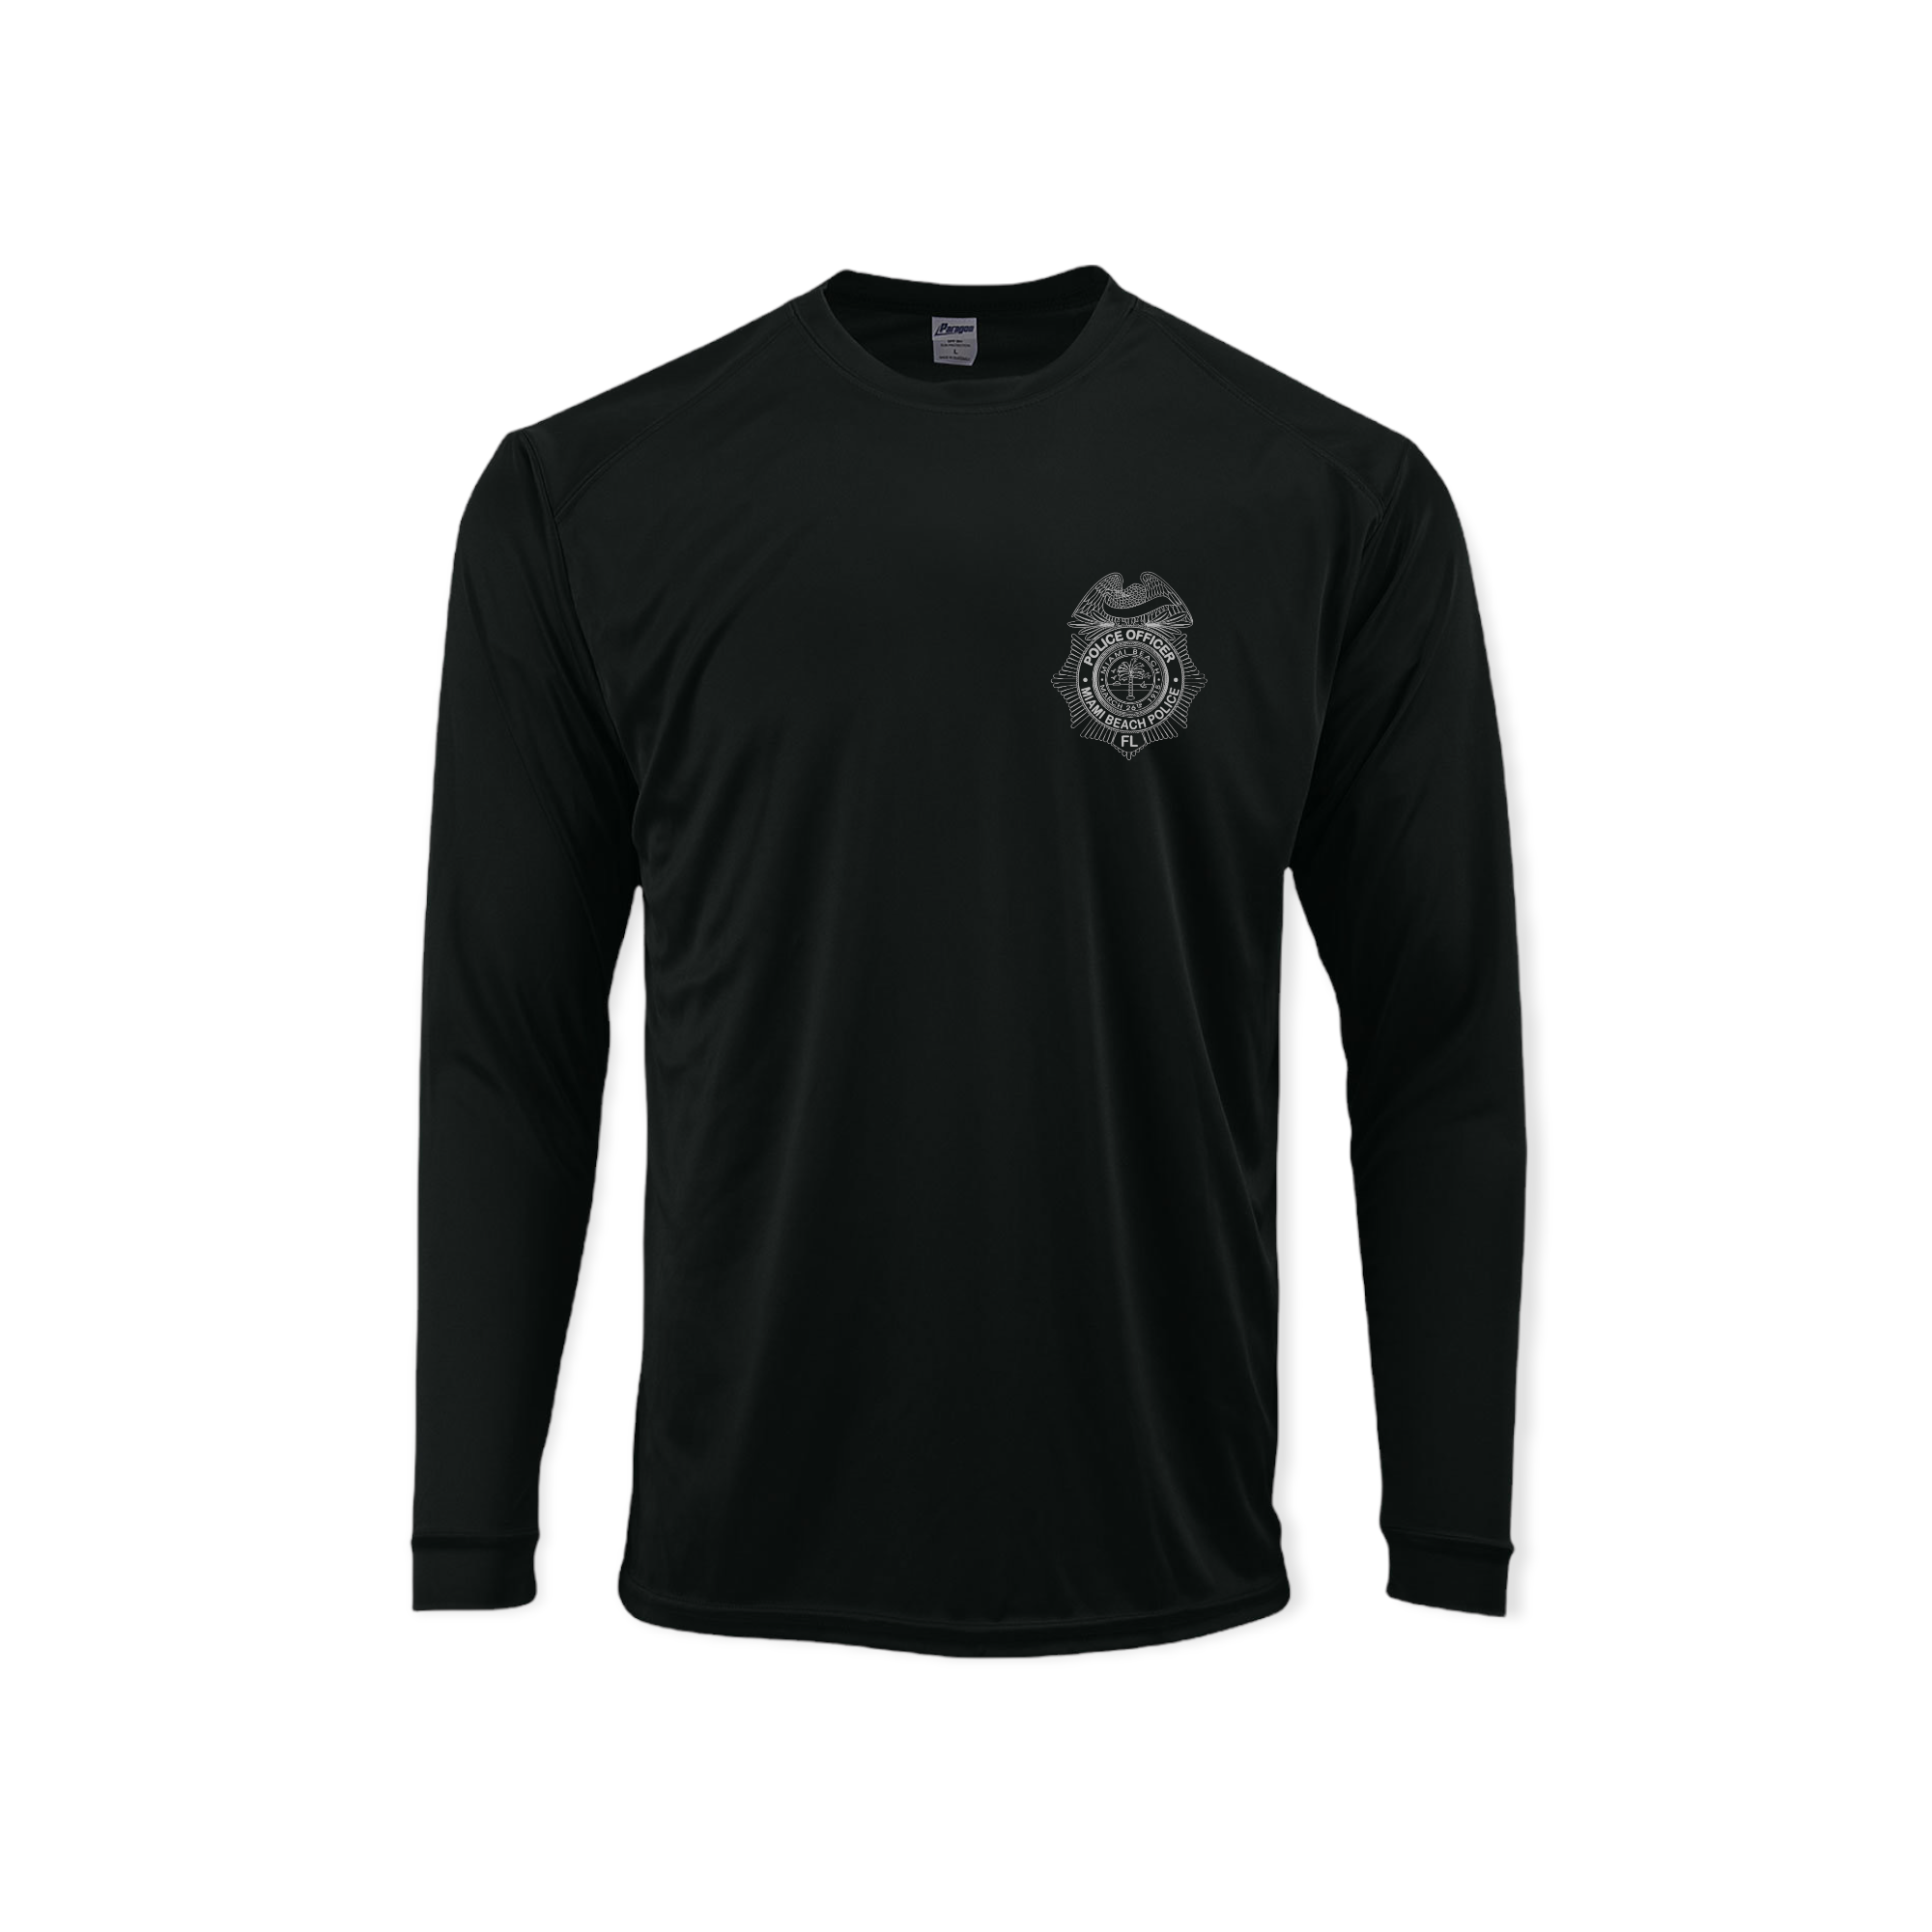 Miami Beach Police Department Cooling Performance Longsleeve